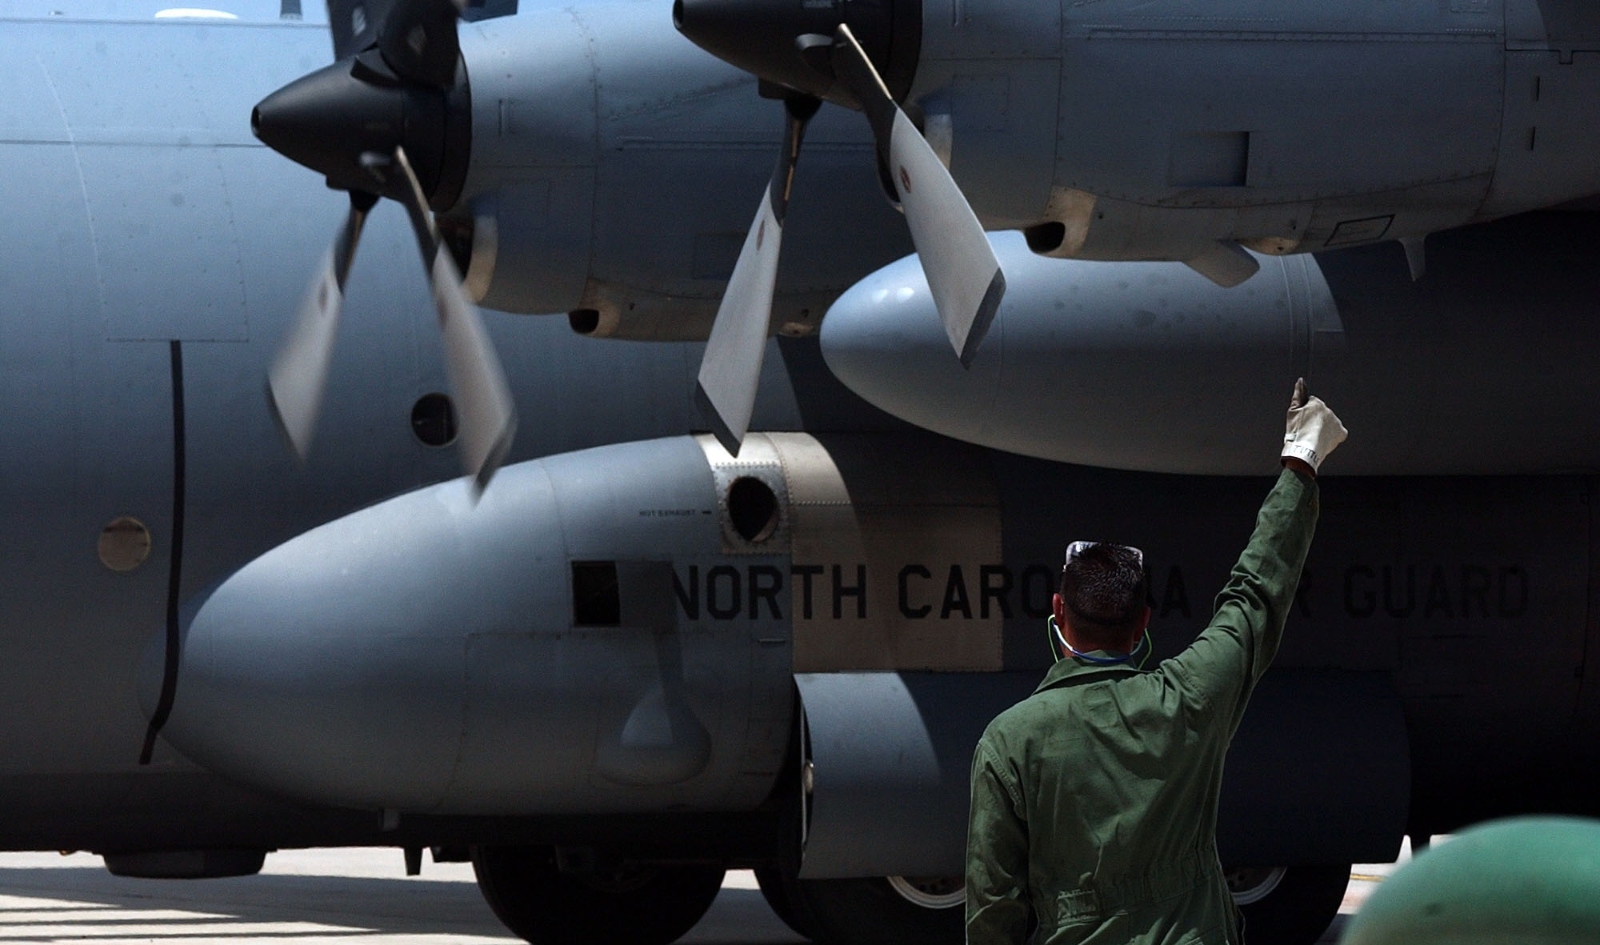 A maintanence worker at the Peterson Air Force Base in Colorado Springs gives a thumbs up to crew on a C-130 aircraft.